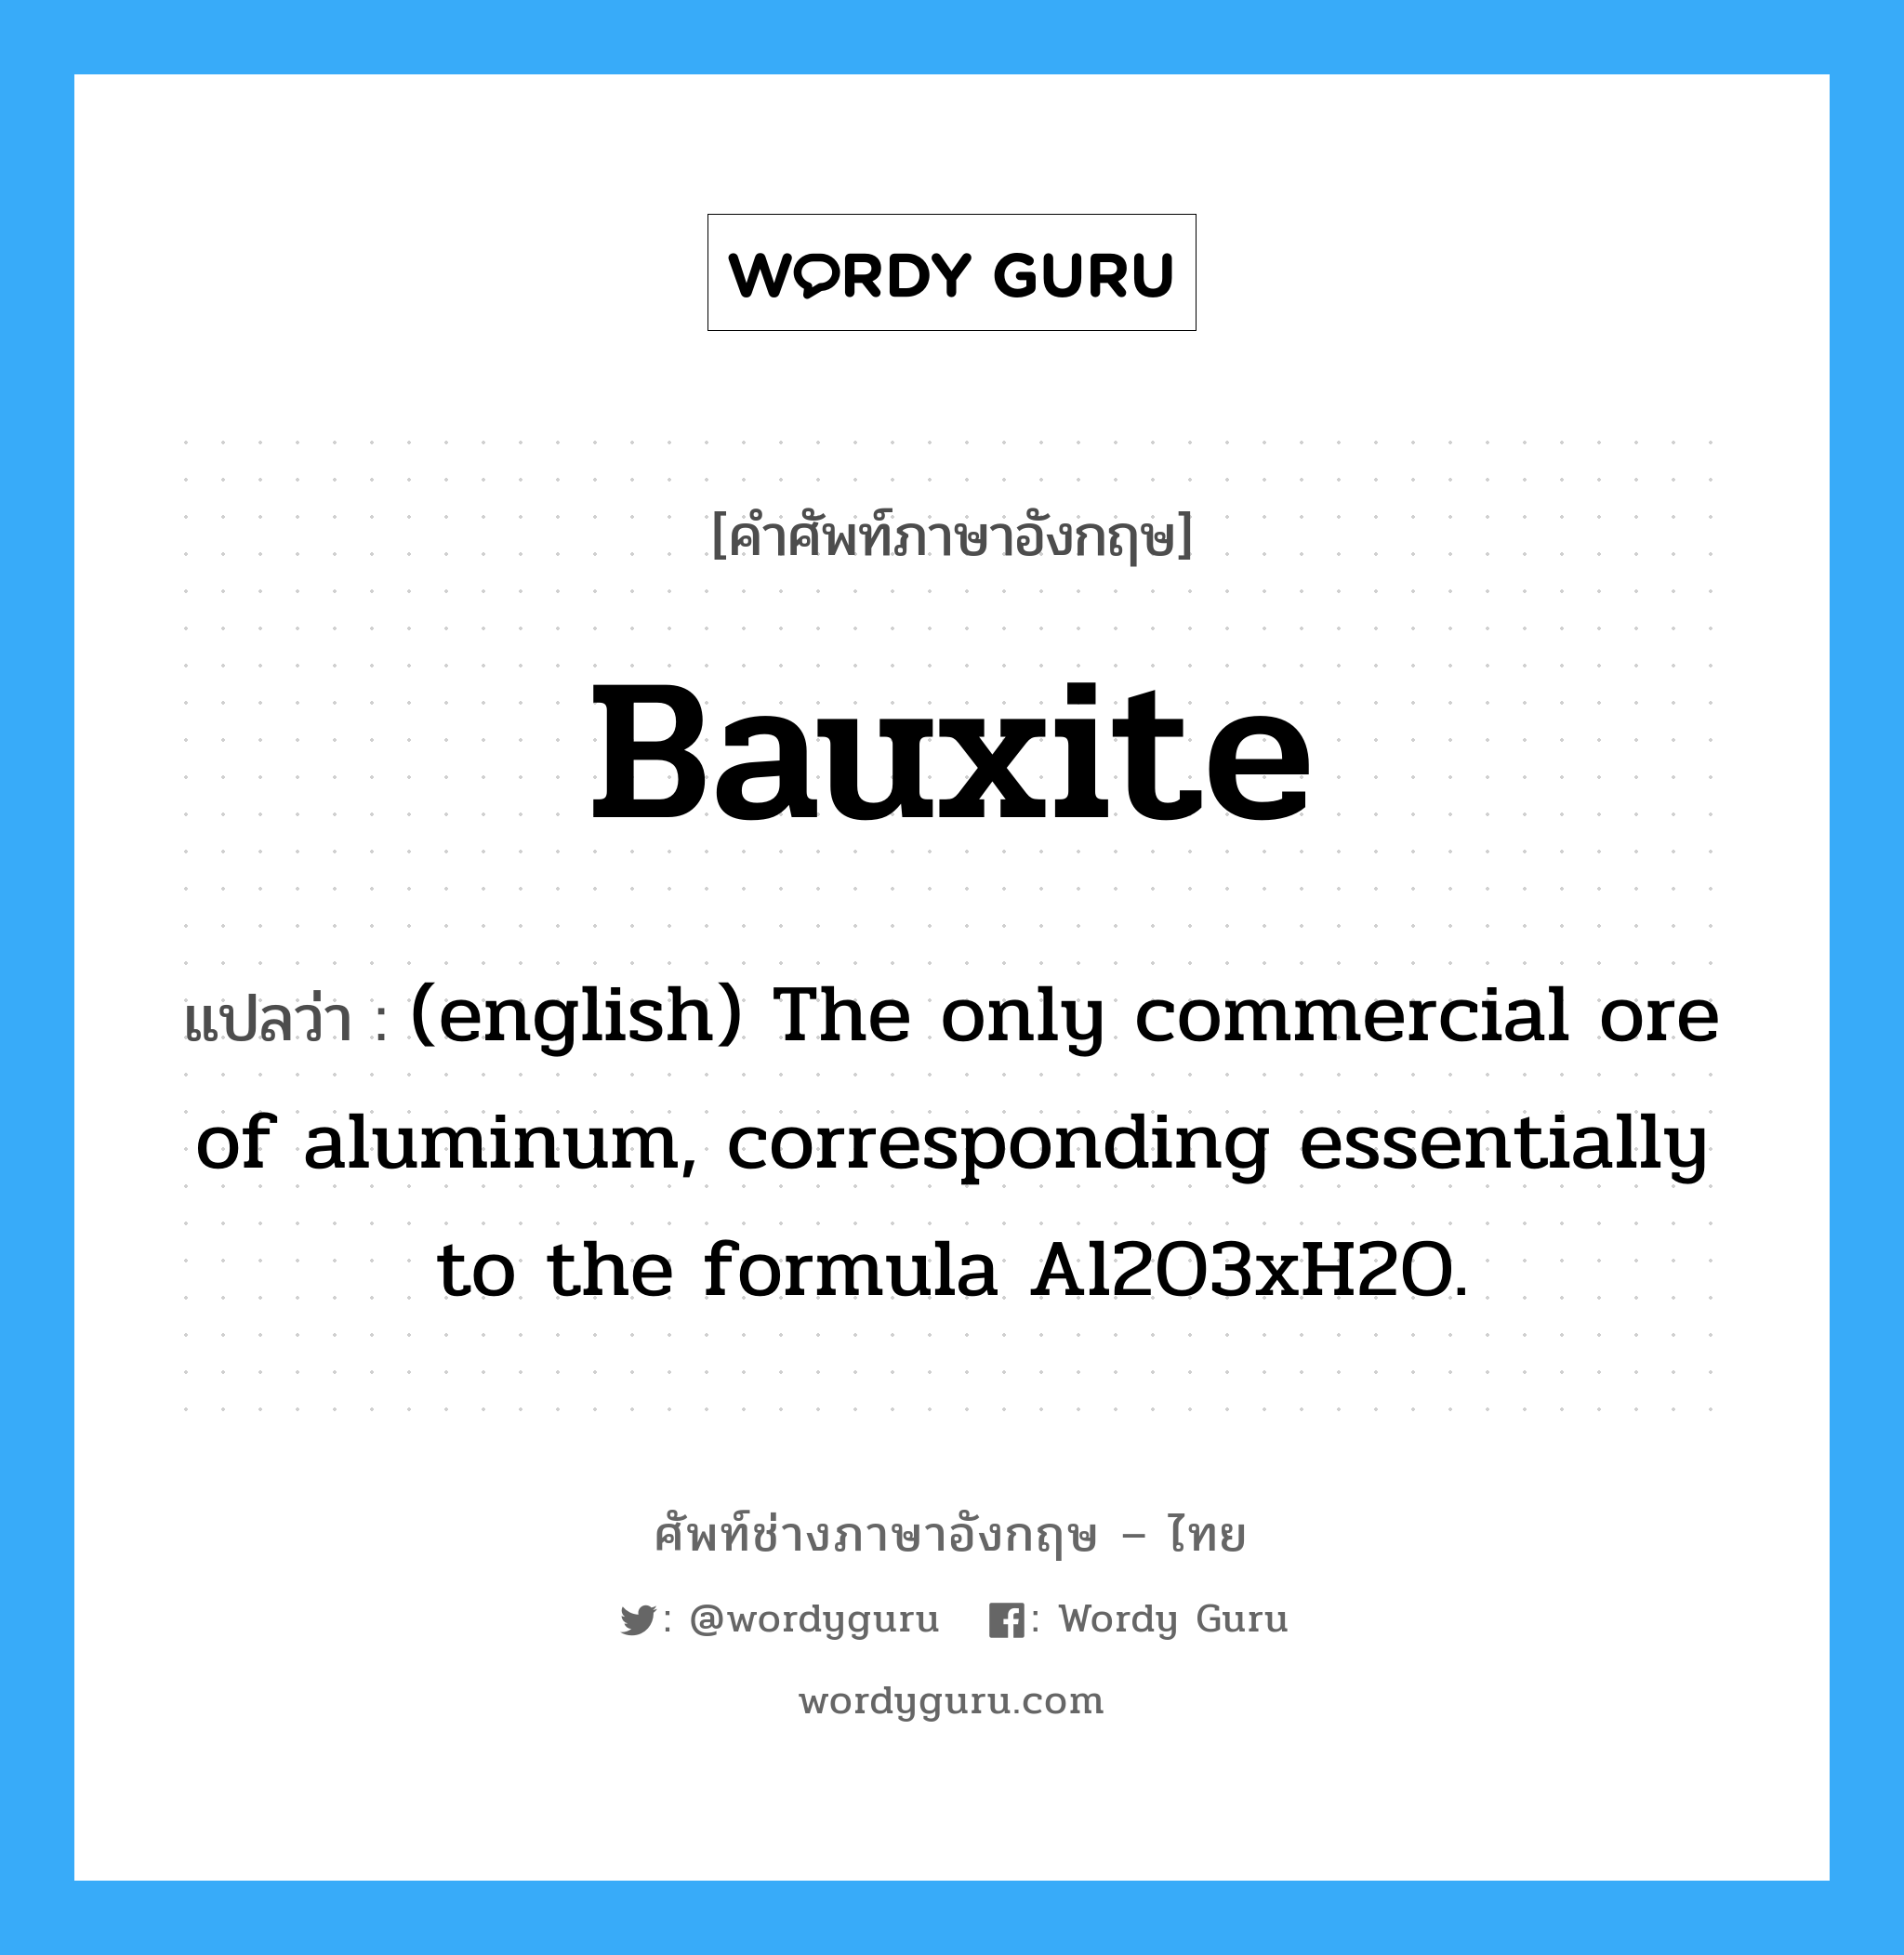 Bauxite แปลว่า?, คำศัพท์ช่างภาษาอังกฤษ - ไทย Bauxite คำศัพท์ภาษาอังกฤษ Bauxite แปลว่า (english) The only commercial ore of aluminum, corresponding essentially to the formula Al2O3xH2O.